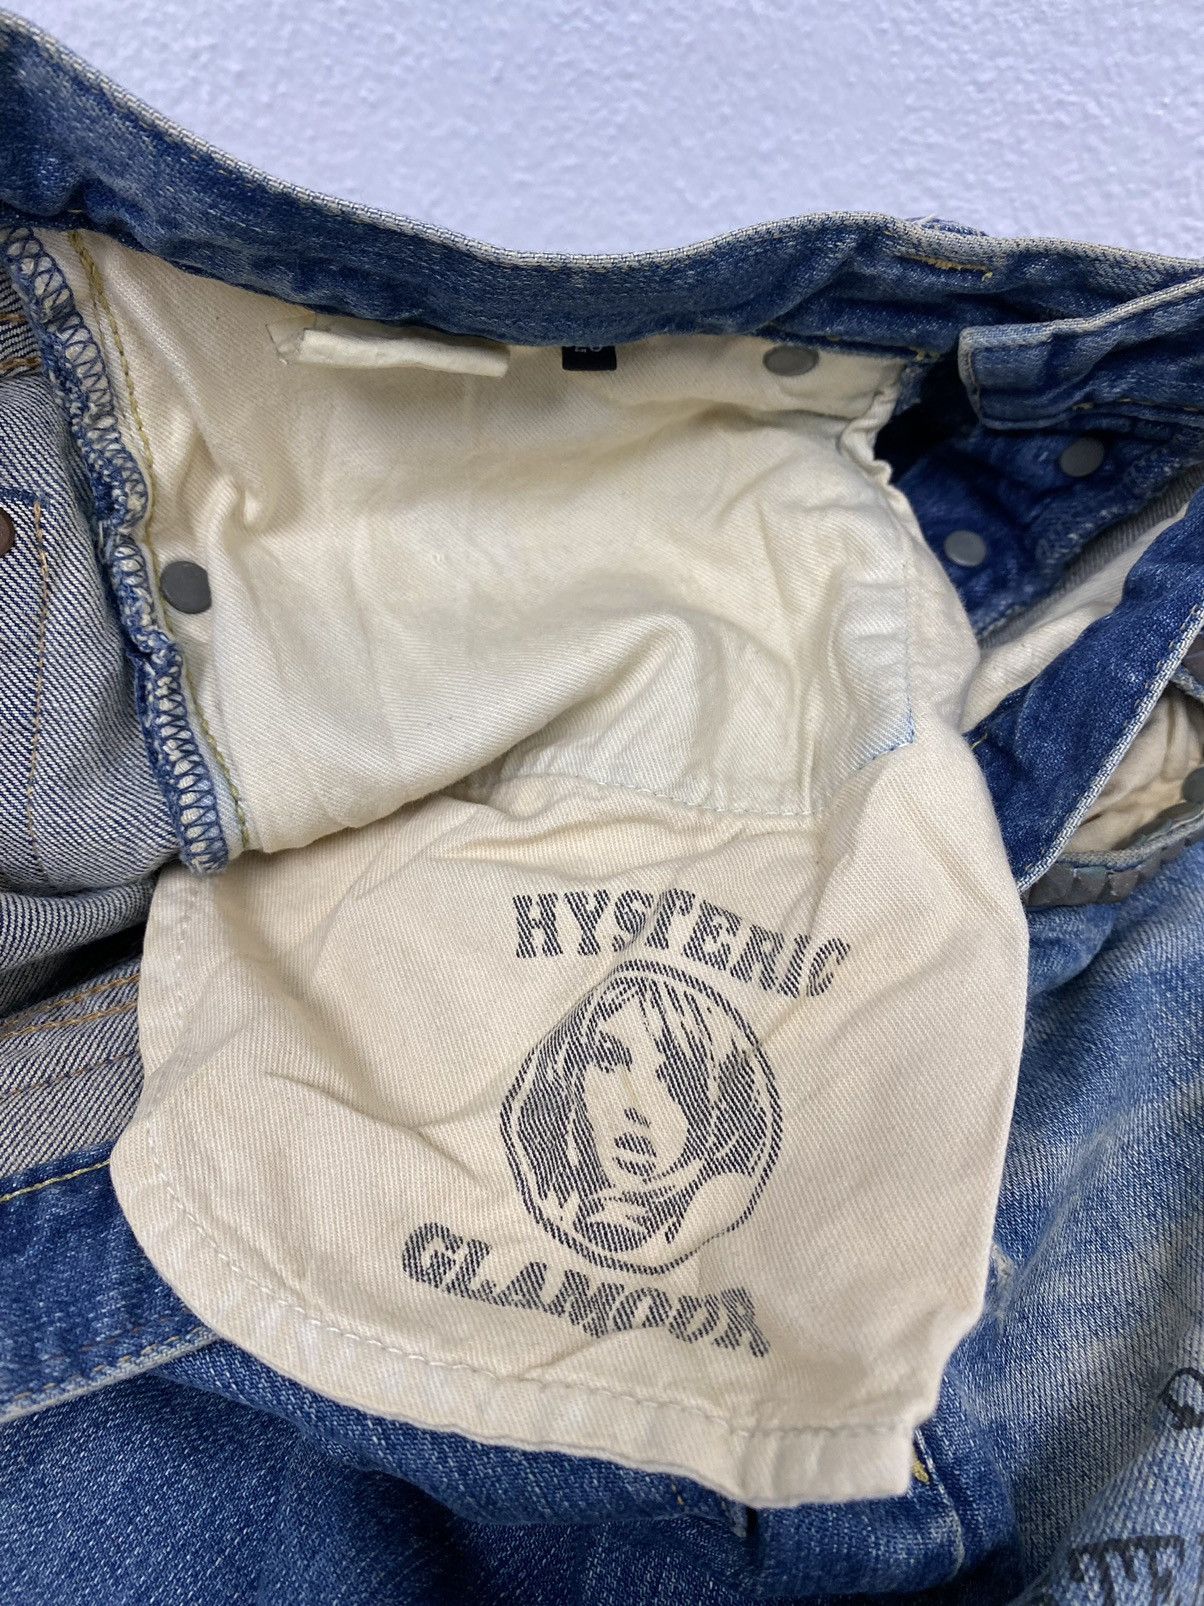 Hysteric Glamour "Do You Wanna Have Fun Tonight” Denim Jeans - 15